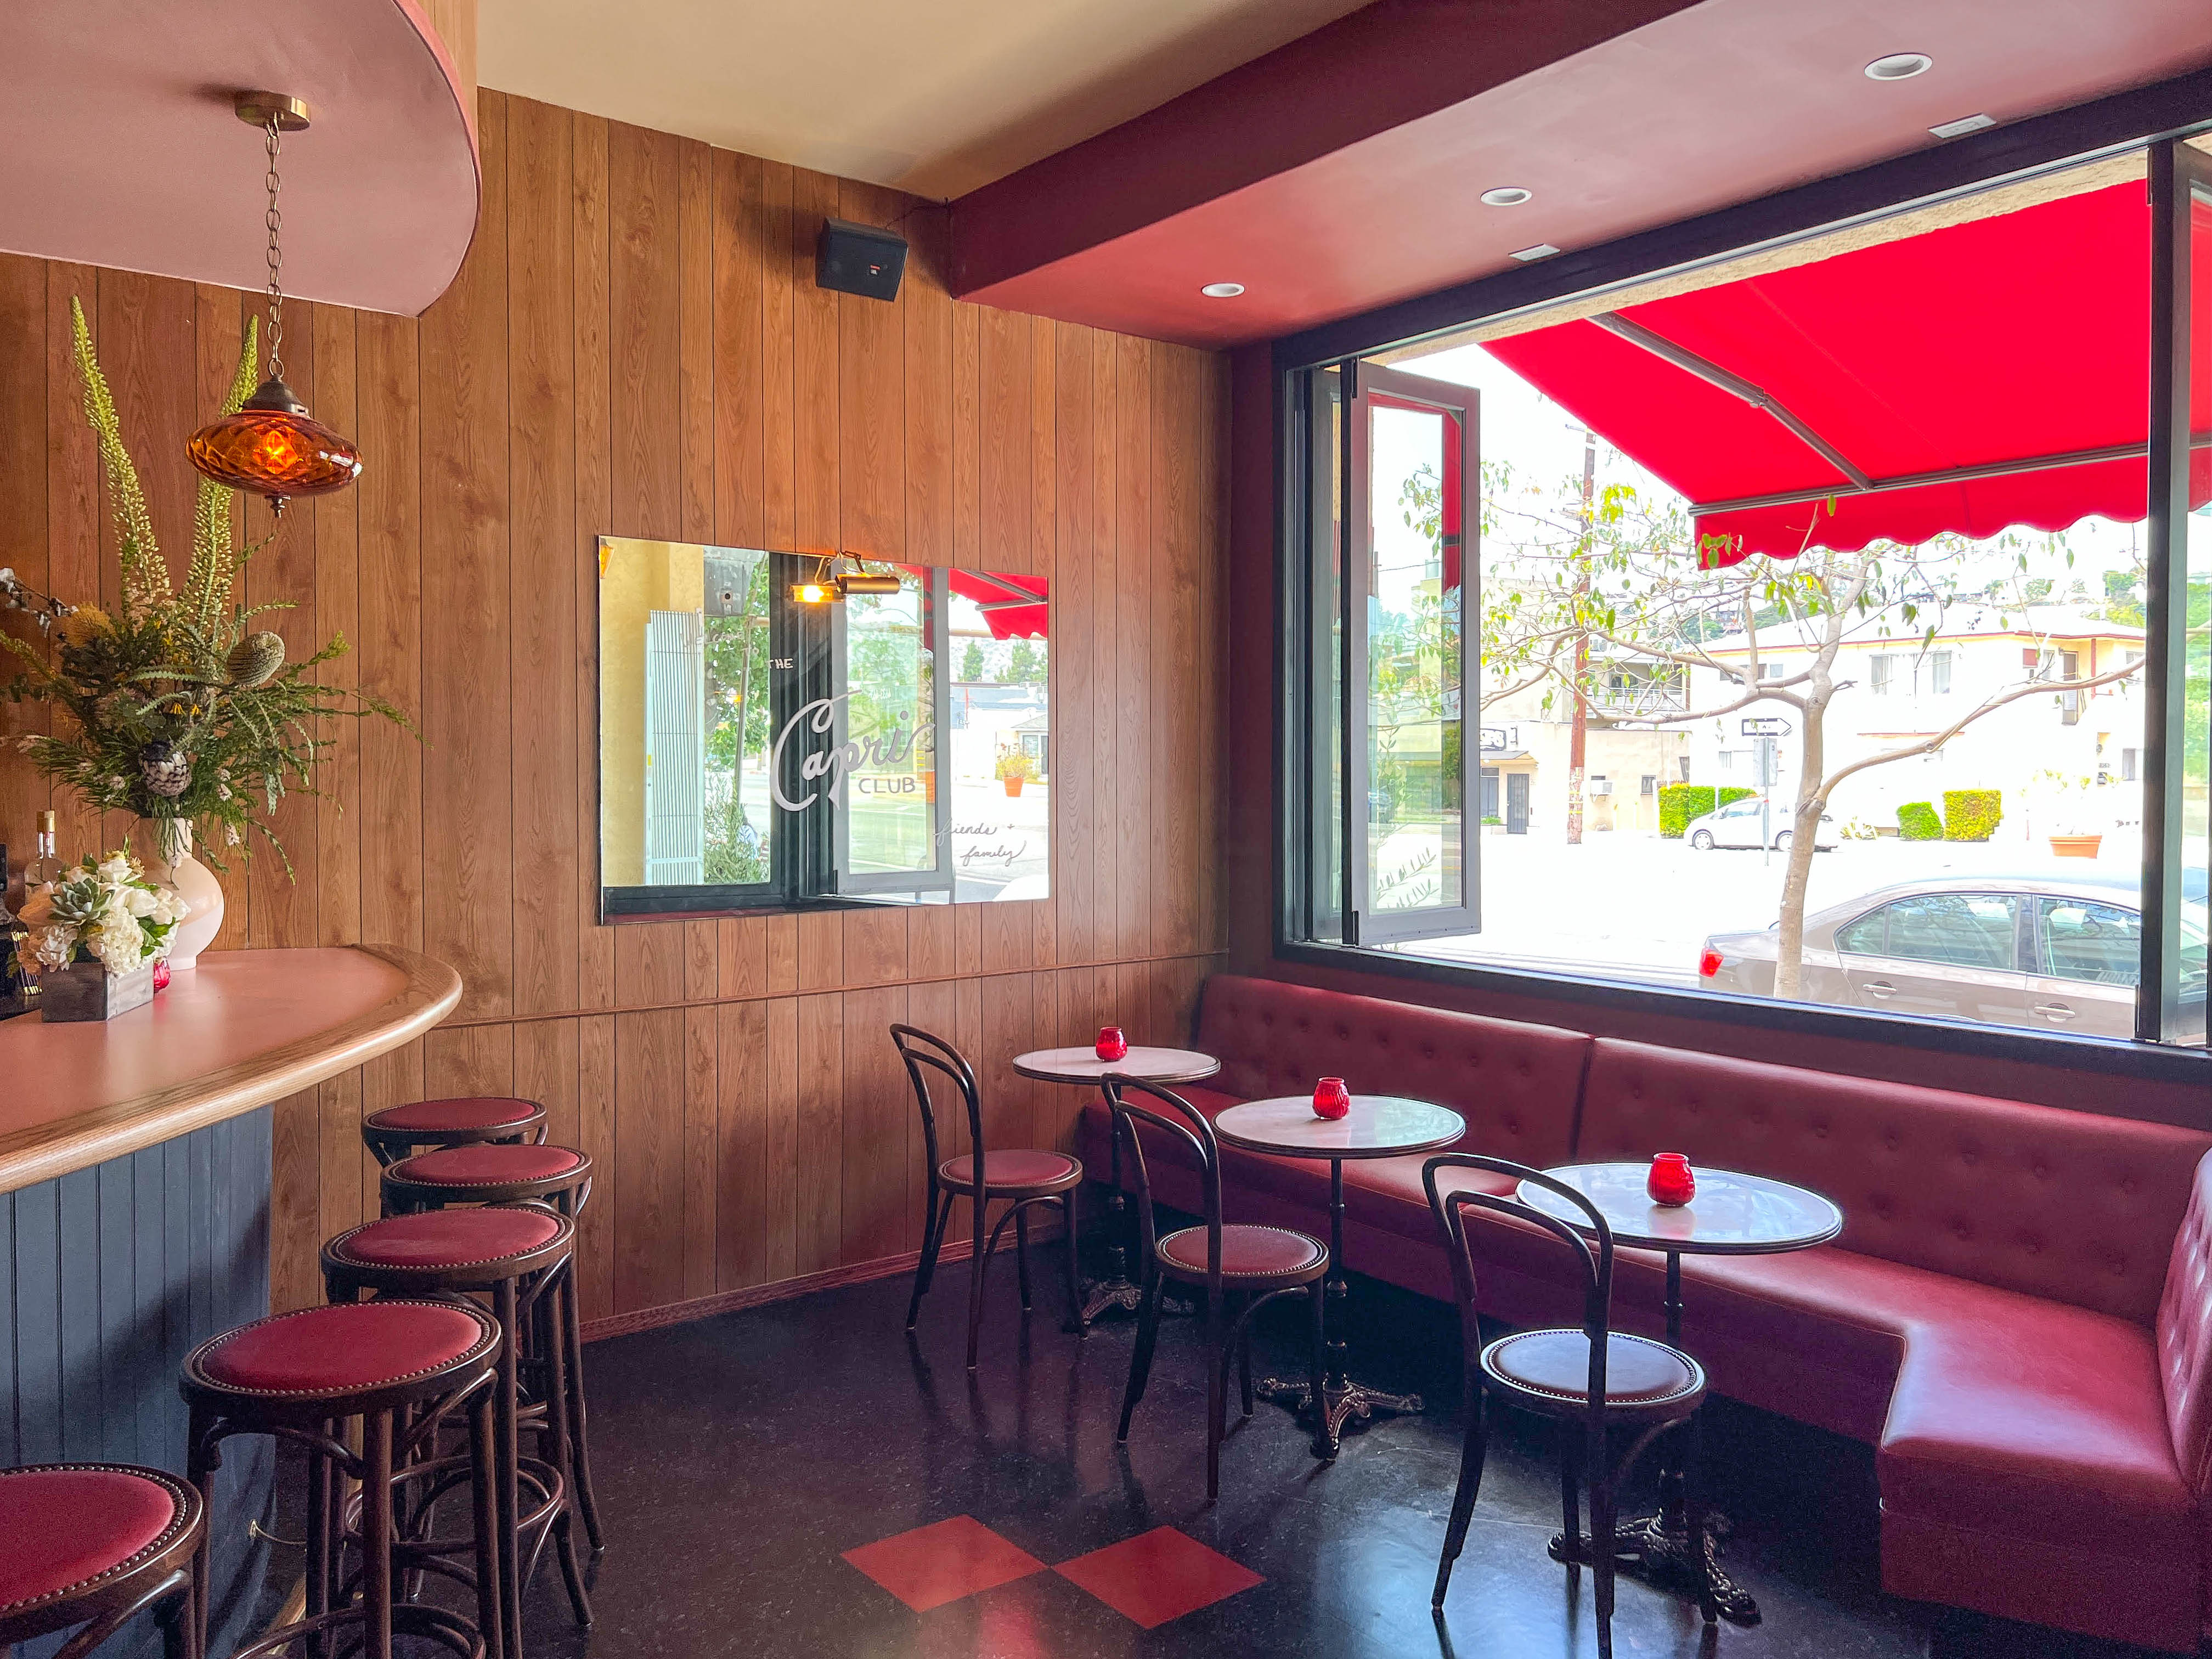 A corner look at a new bar with wood paneling and red booths, at daytime.